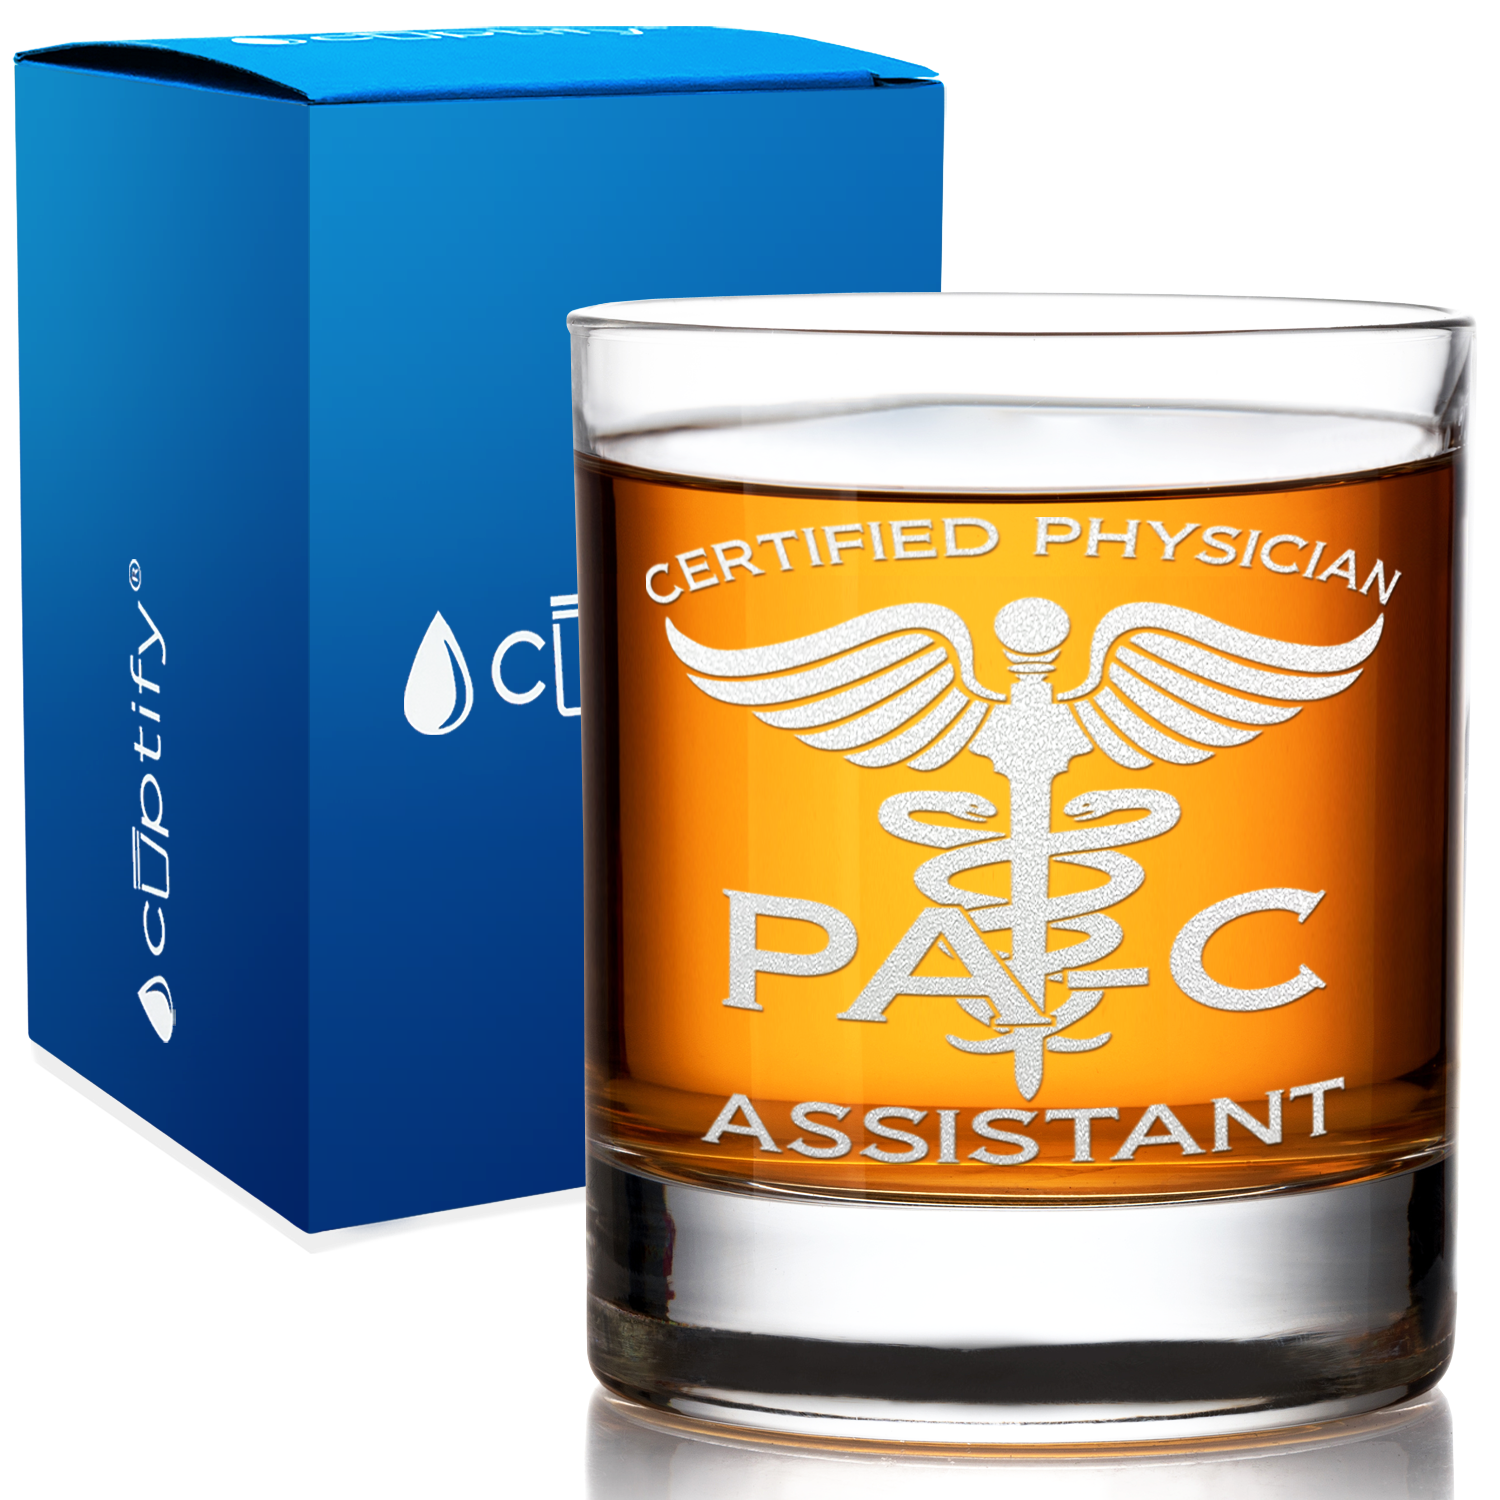 PA-C Certified Physician Assistant on 10.25oz Whiskey Glass